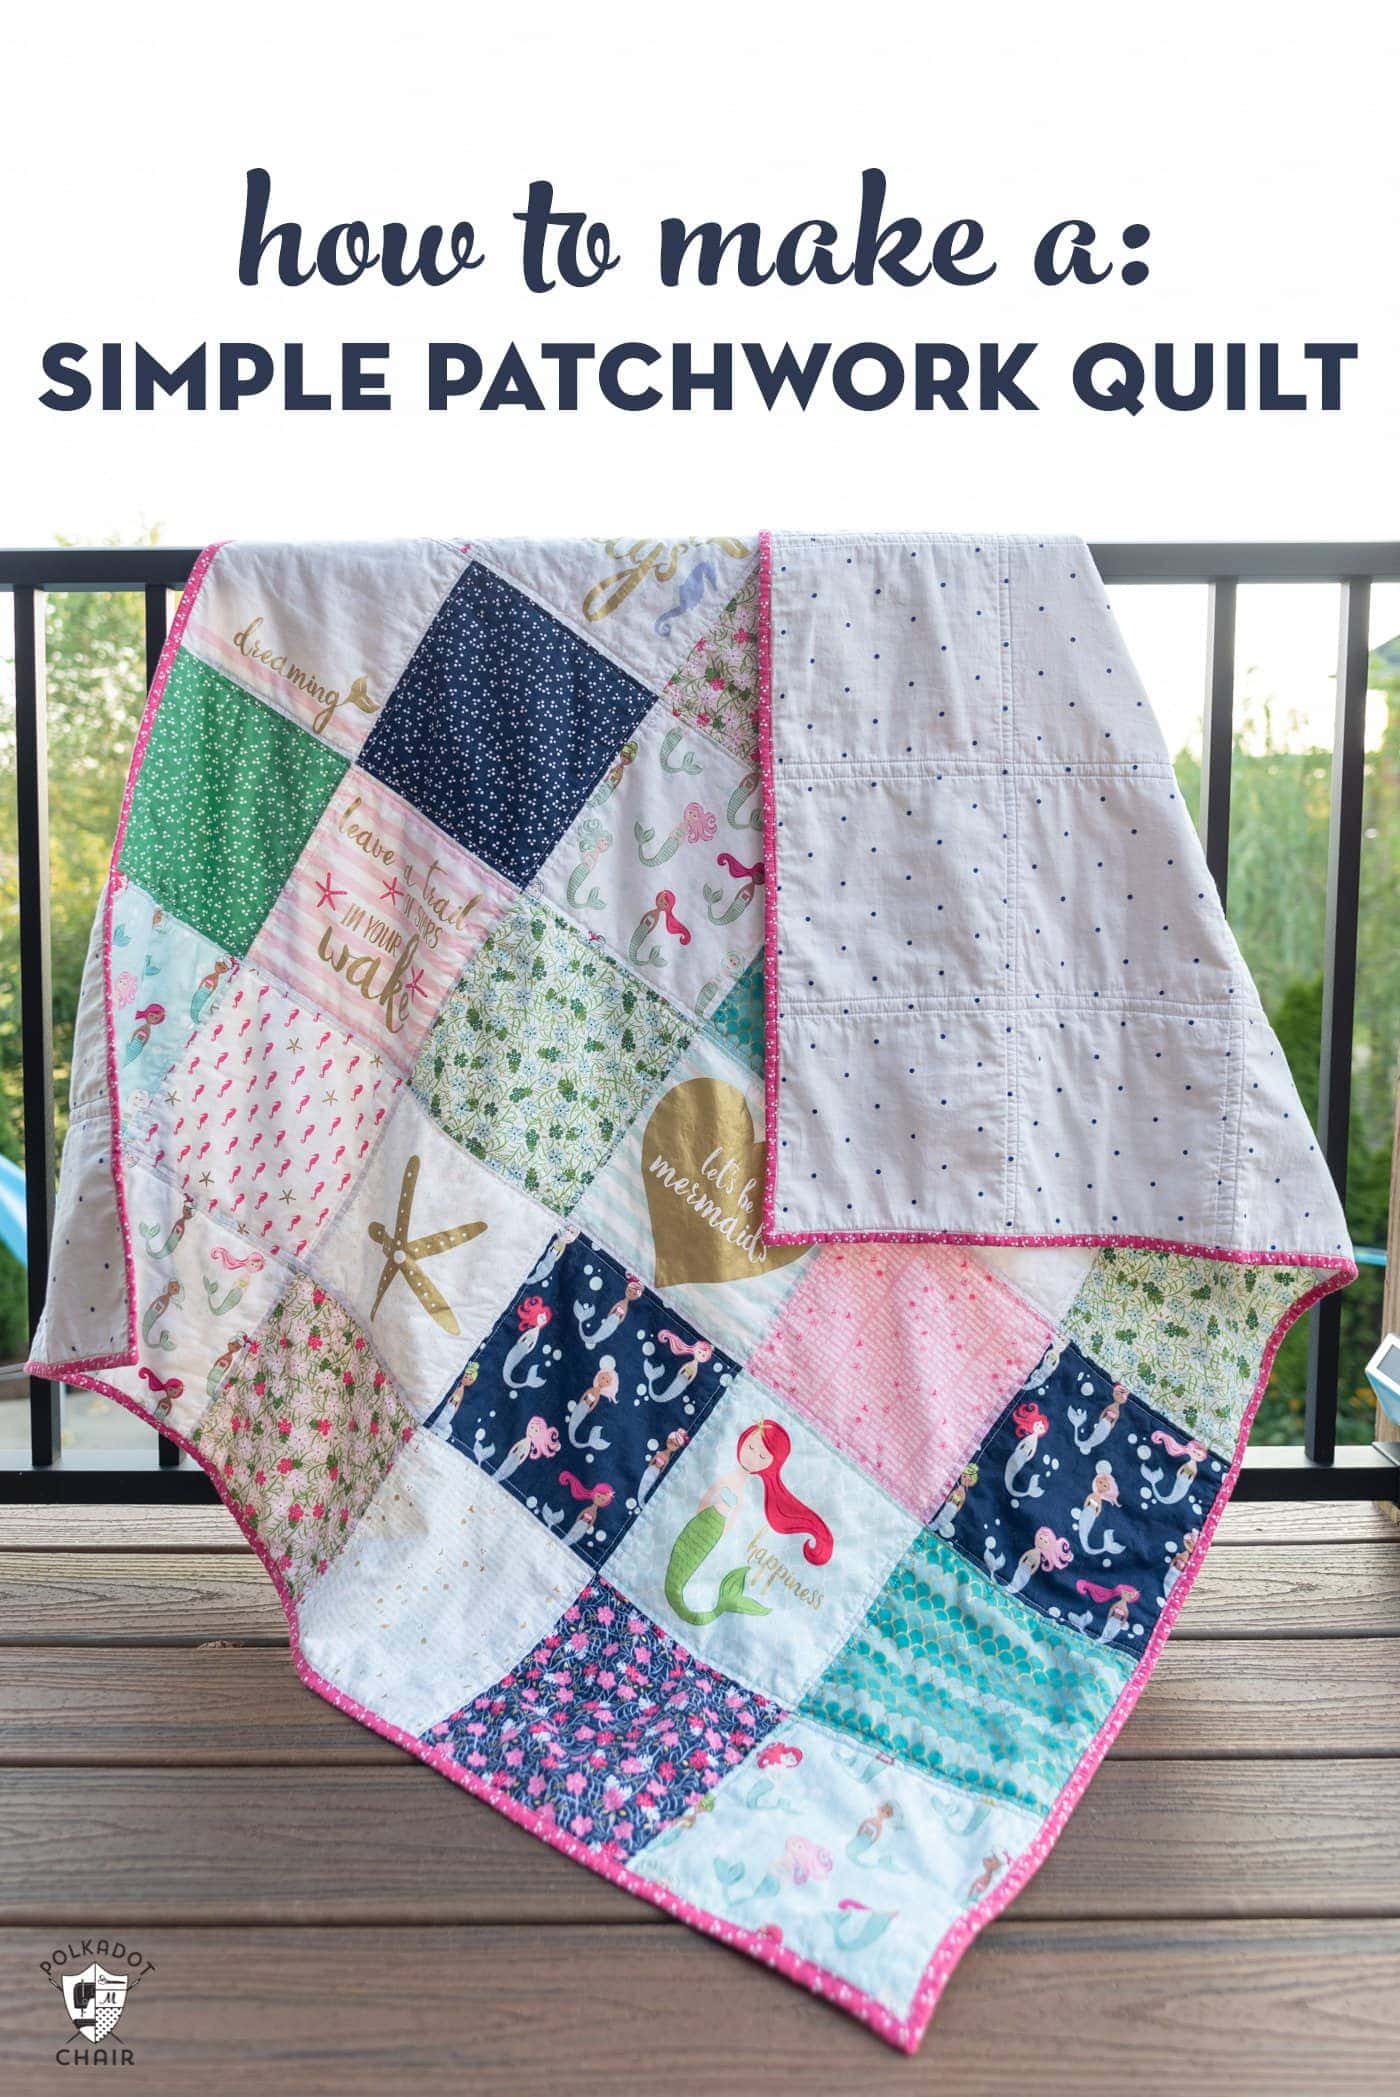 How to Make a Simple Patchwork Quilt - The Polka Dot Chair